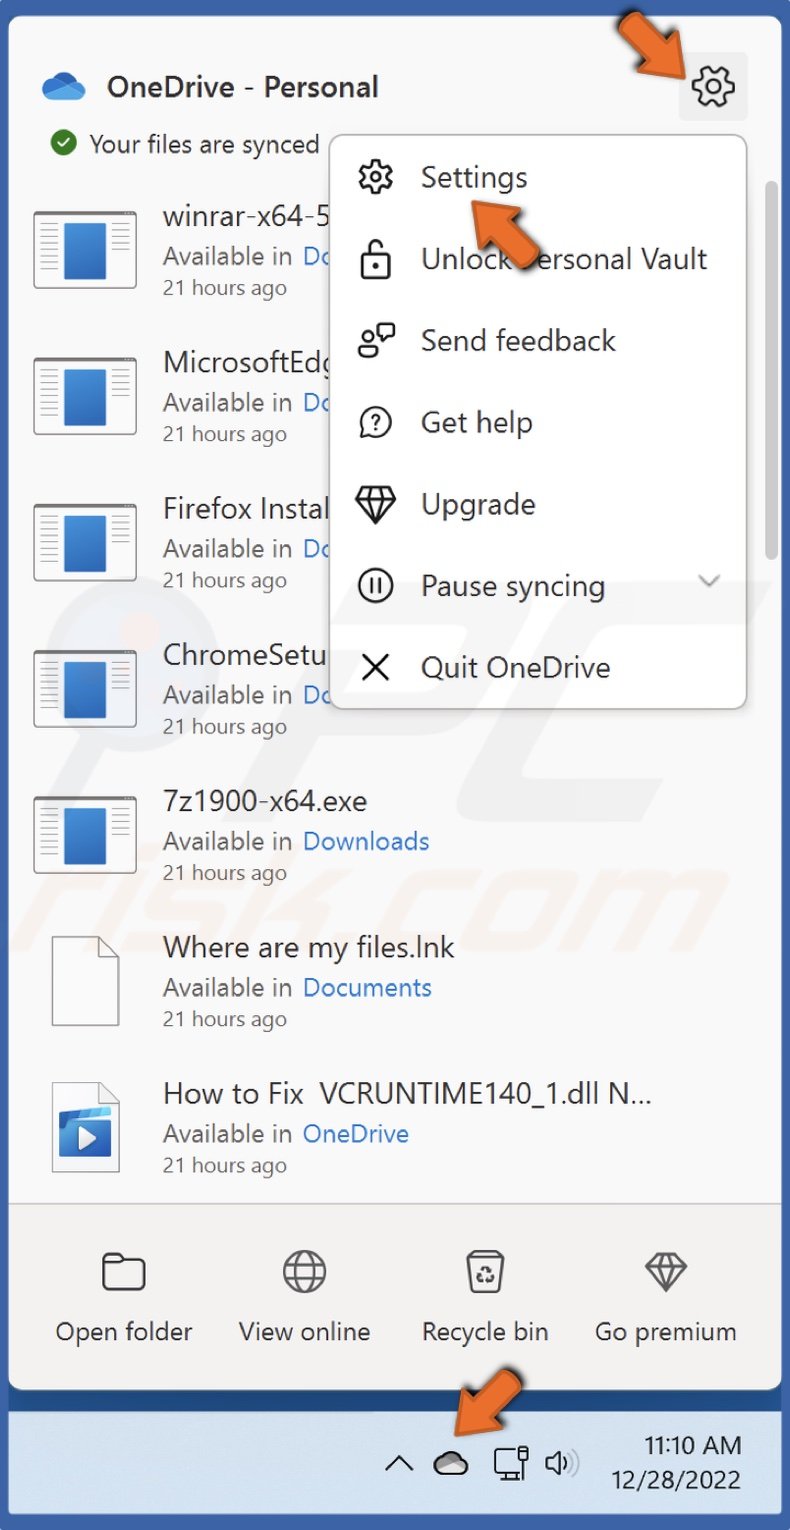 Click the OneDrive icon, click Help & settings icon and select Settings